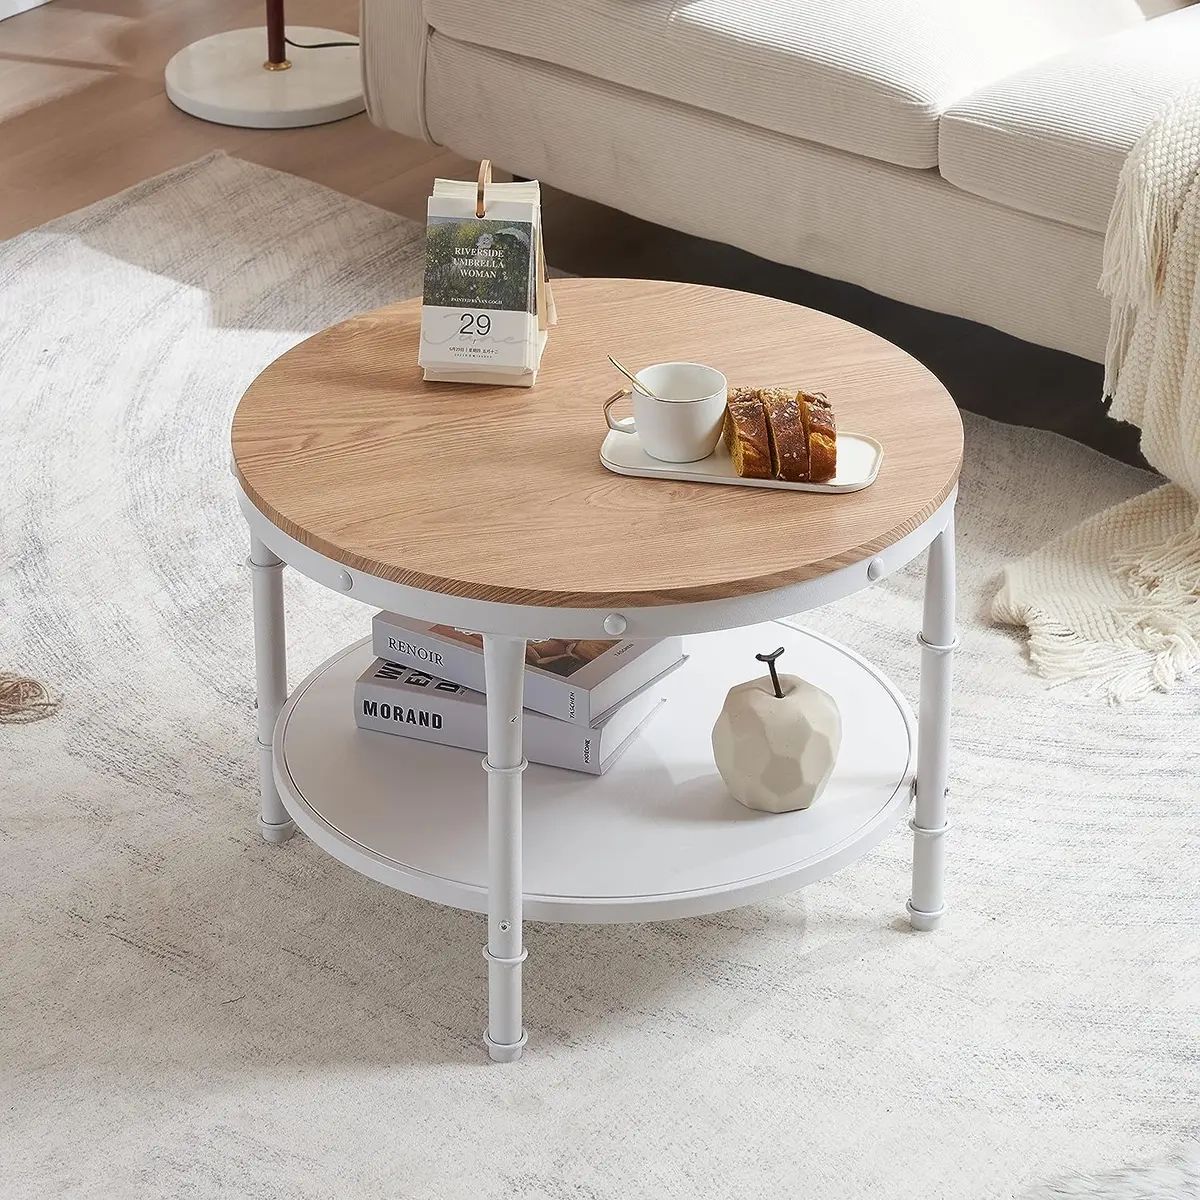 25.6″ Natural White Round Farmhouse Coffee Table, 2 Tier Storage Wood  Center | Ebay Regarding Wood Coffee Tables With 2 Tier Storage (Photo 4 of 15)